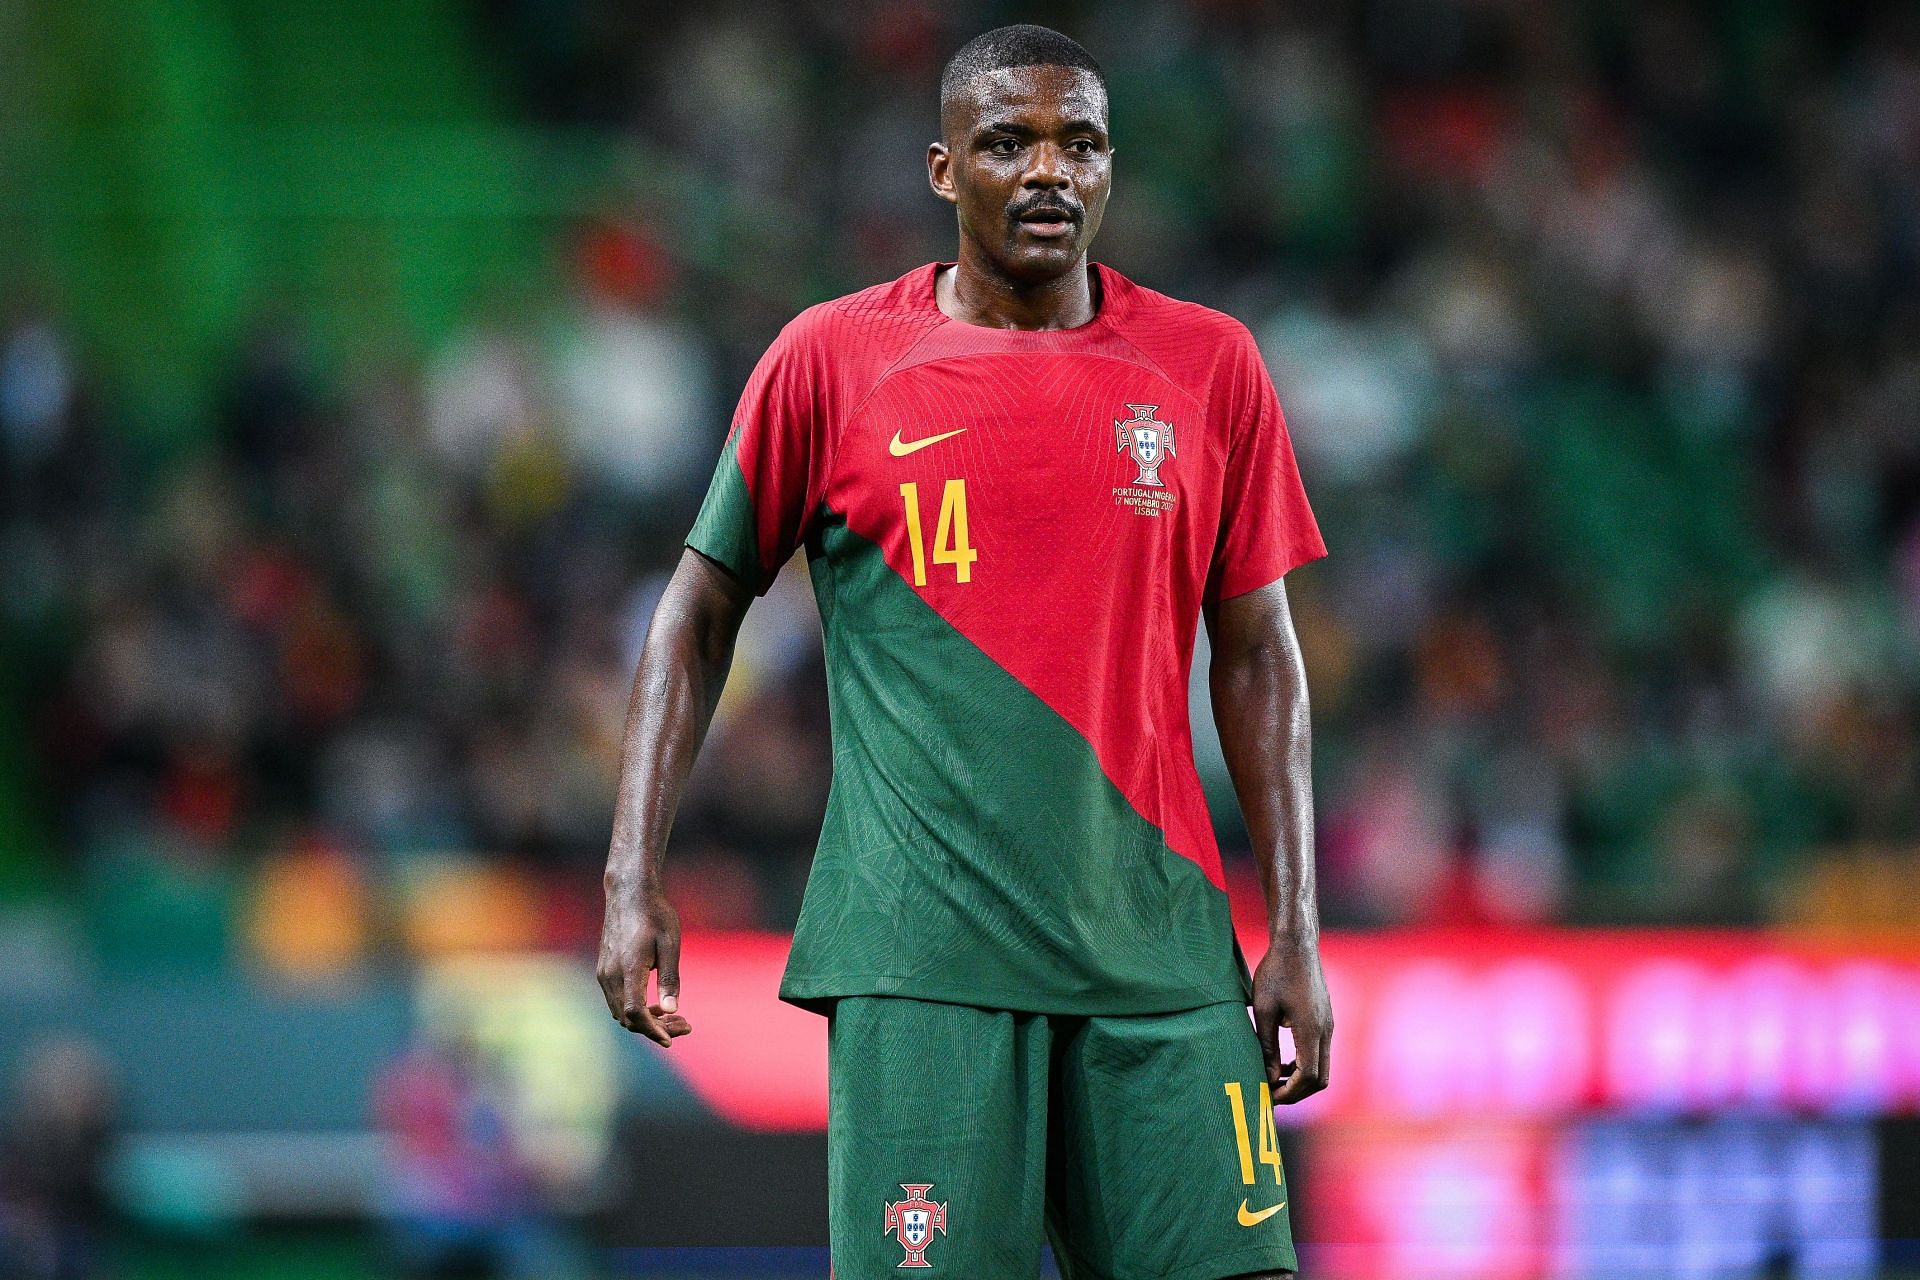 William Carvalho is wanted at the Emirates.